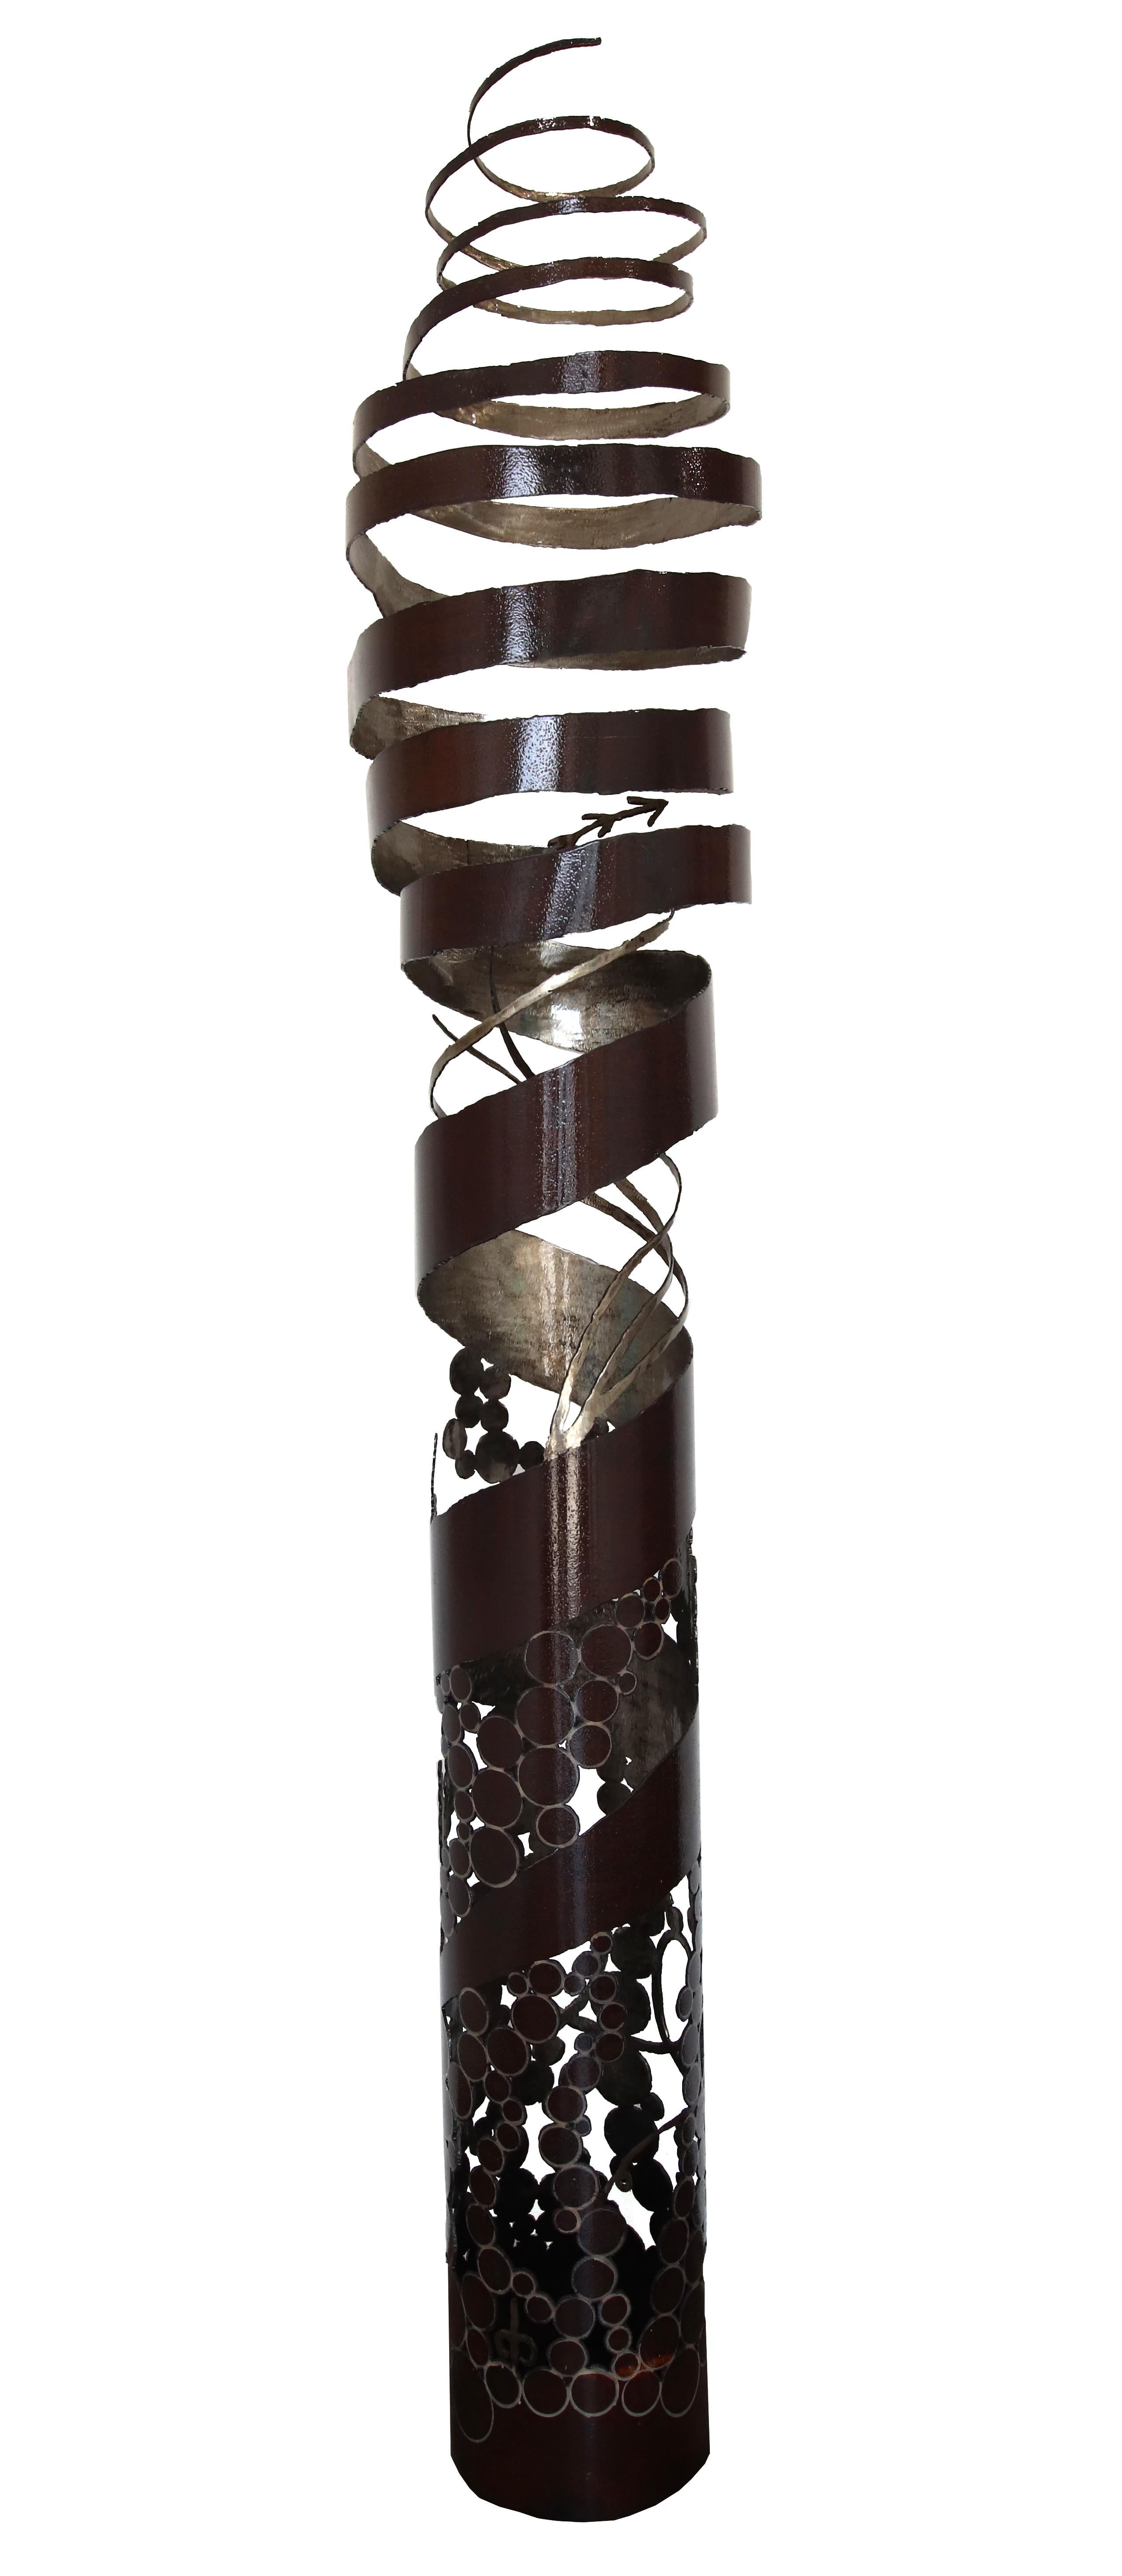 Spiral to the Third Power -  Large Steel Sculpture for Outdoors and Indoors - Mixed Media Art by D'Arcy Bellamy